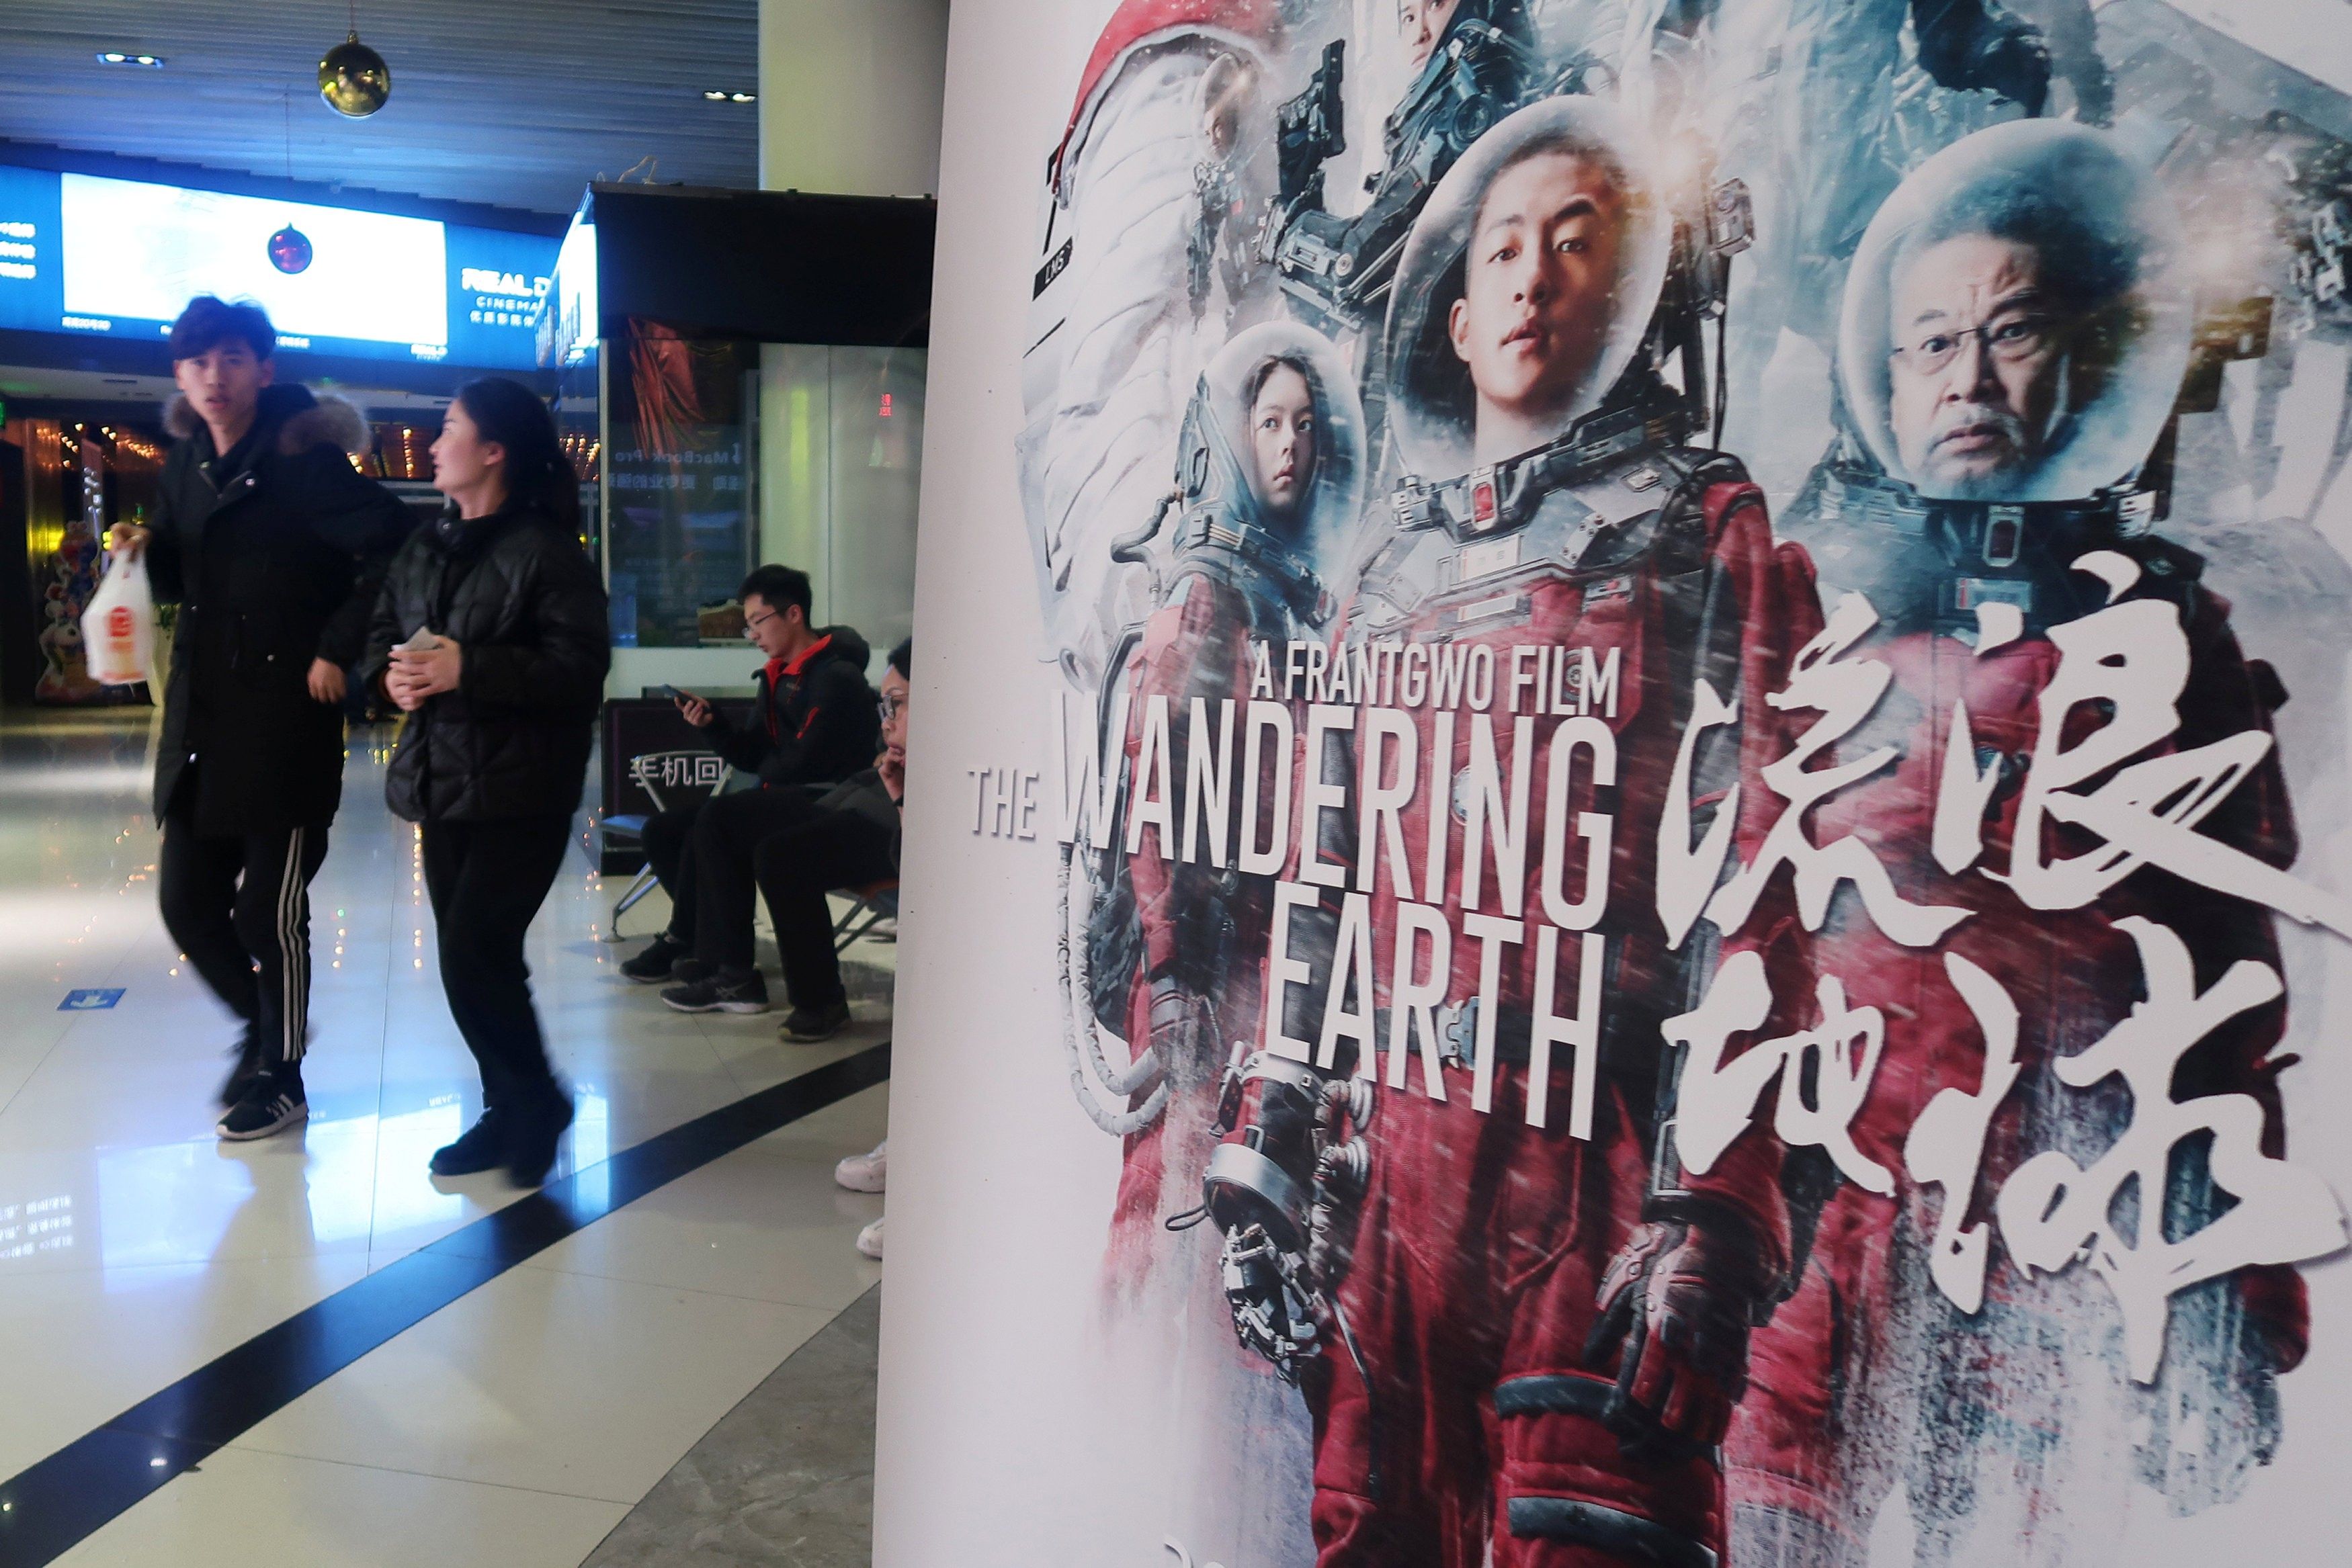 Why Frant Gwo's 'The Wandering Earth', feted in mainland China, is unloved in Hong Kong. South China Morning Post